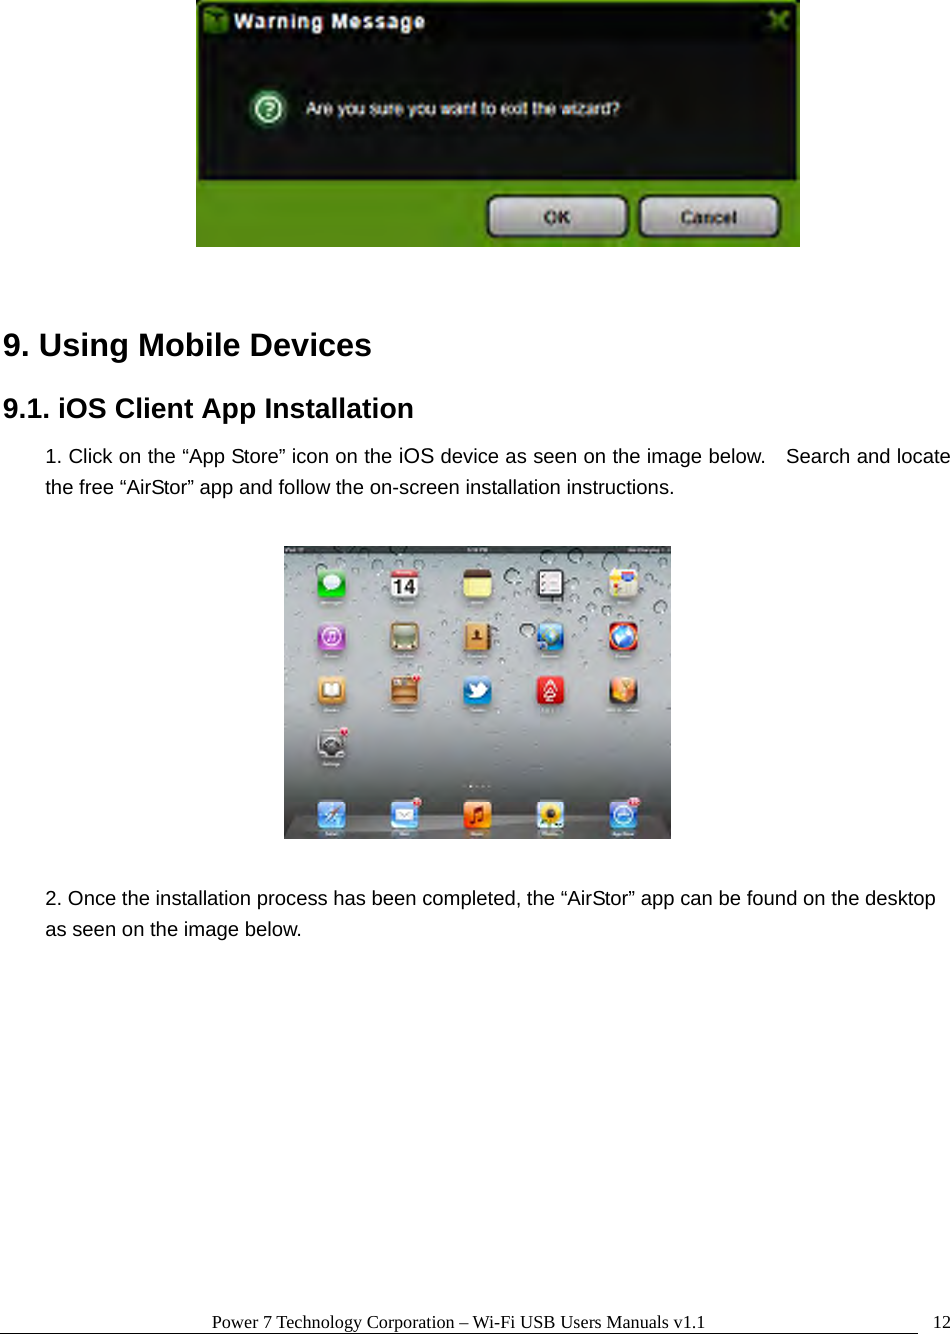 Power 7 Technology Corporation – Wi-Fi USB Users Manuals v1.1  12  9. Using Mobile Devices 9.1. iOS Client App Installation 1. Click on the “App Store” icon on the iOS device as seen on the image below.    Search and locate the free “AirStor” app and follow the on-screen installation instructions.    2. Once the installation process has been completed, the “AirStor” app can be found on the desktop as seen on the image below.    